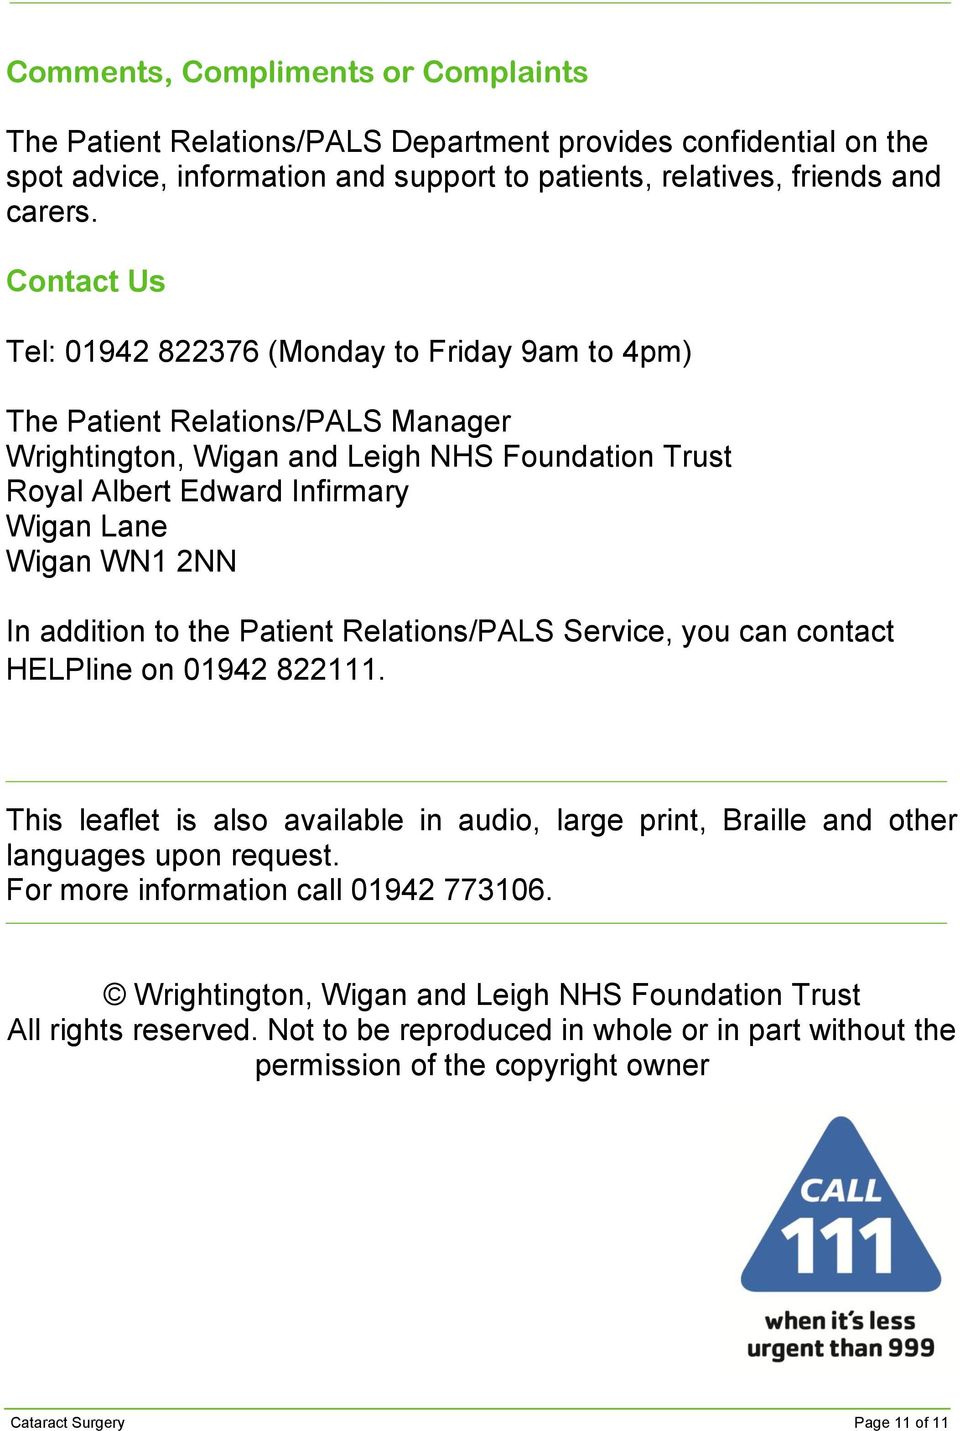 In addition to the Patient Relations/PALS Service, you can contact HELPline on 01942 822111. This leaflet is also available in audio, large print, Braille and other languages upon request.